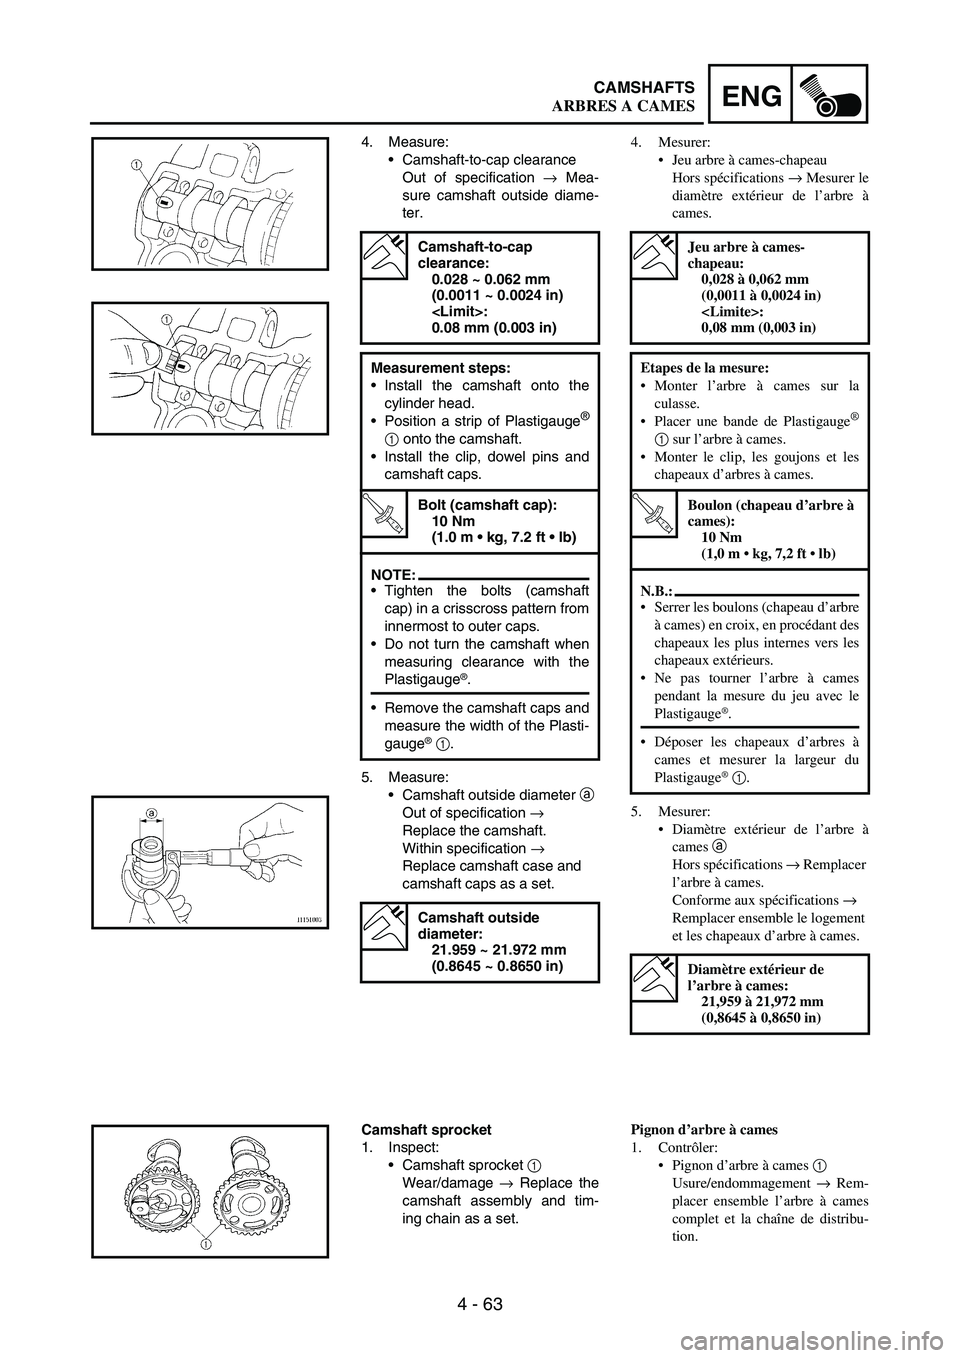 YAMAHA WR 250F 2005  Notices Demploi (in French) 4 - 63
ENGCAMSHAFTS
4. Measure:
Camshaft-to-cap clearance 
Out of specification 
→ Mea-
sure camshaft outside diame-
ter. 
5. Measure: 
Camshaft outside diameter 
a 
Out of specification 
→ 
Rep